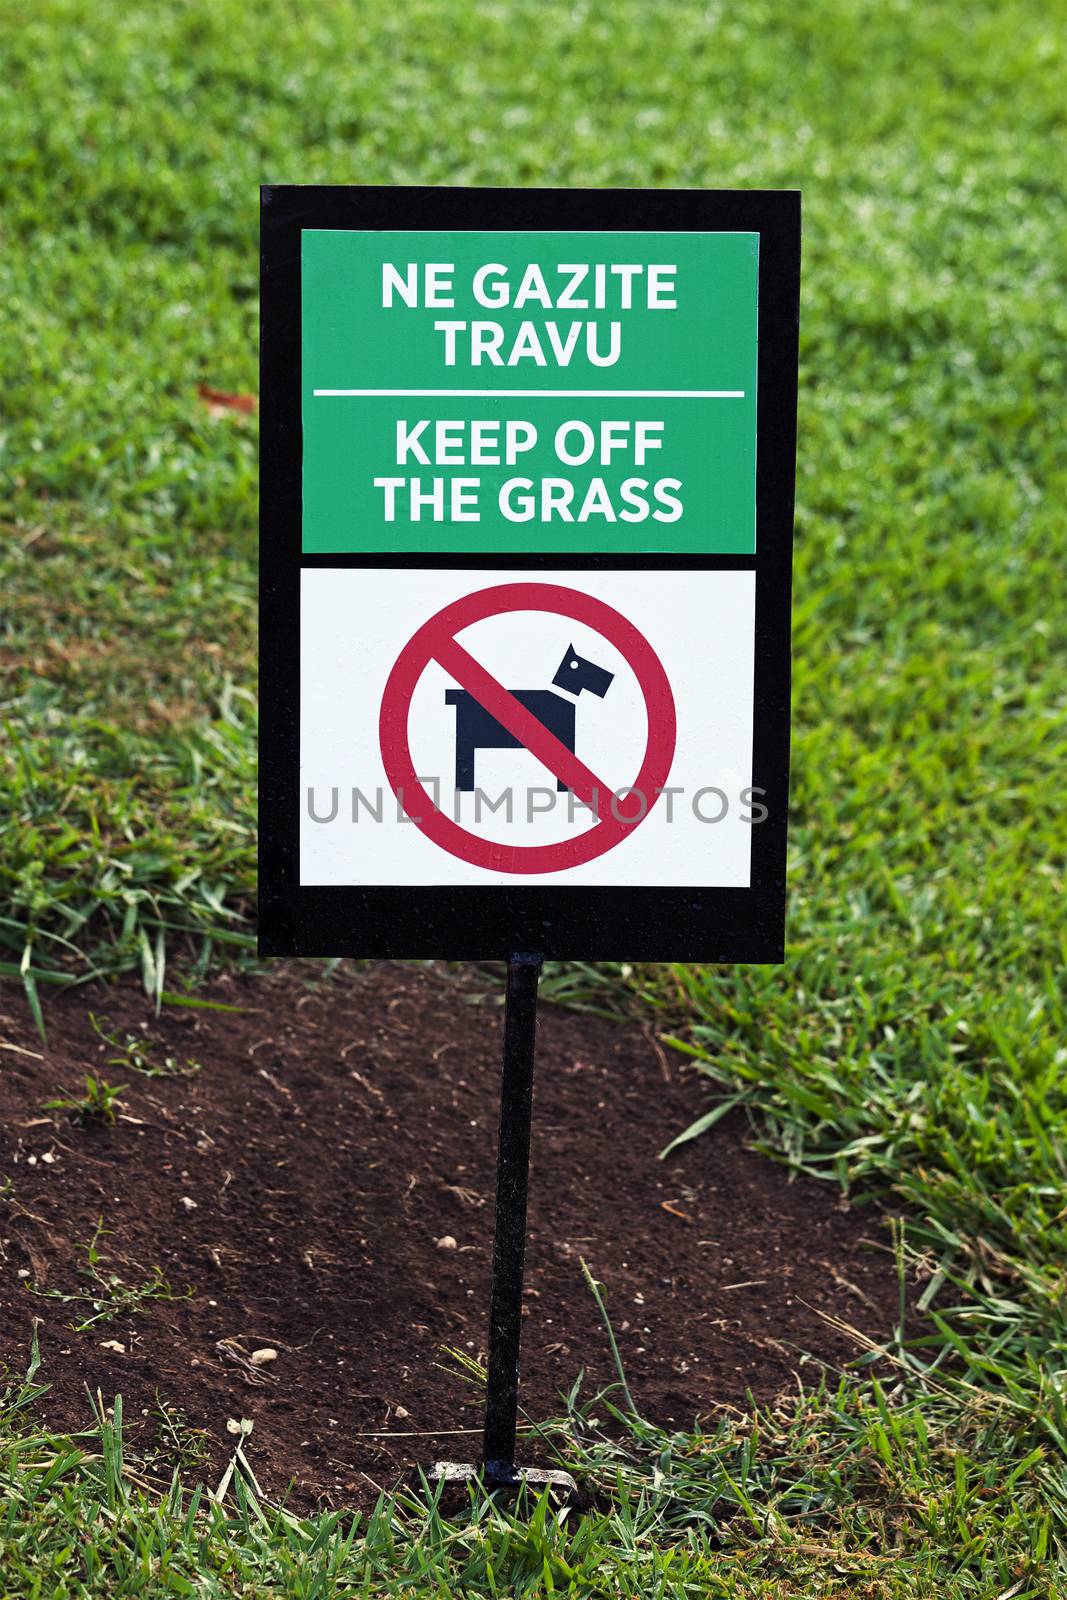   a sign about a circulation ban on the lawns, located in the lawn territory